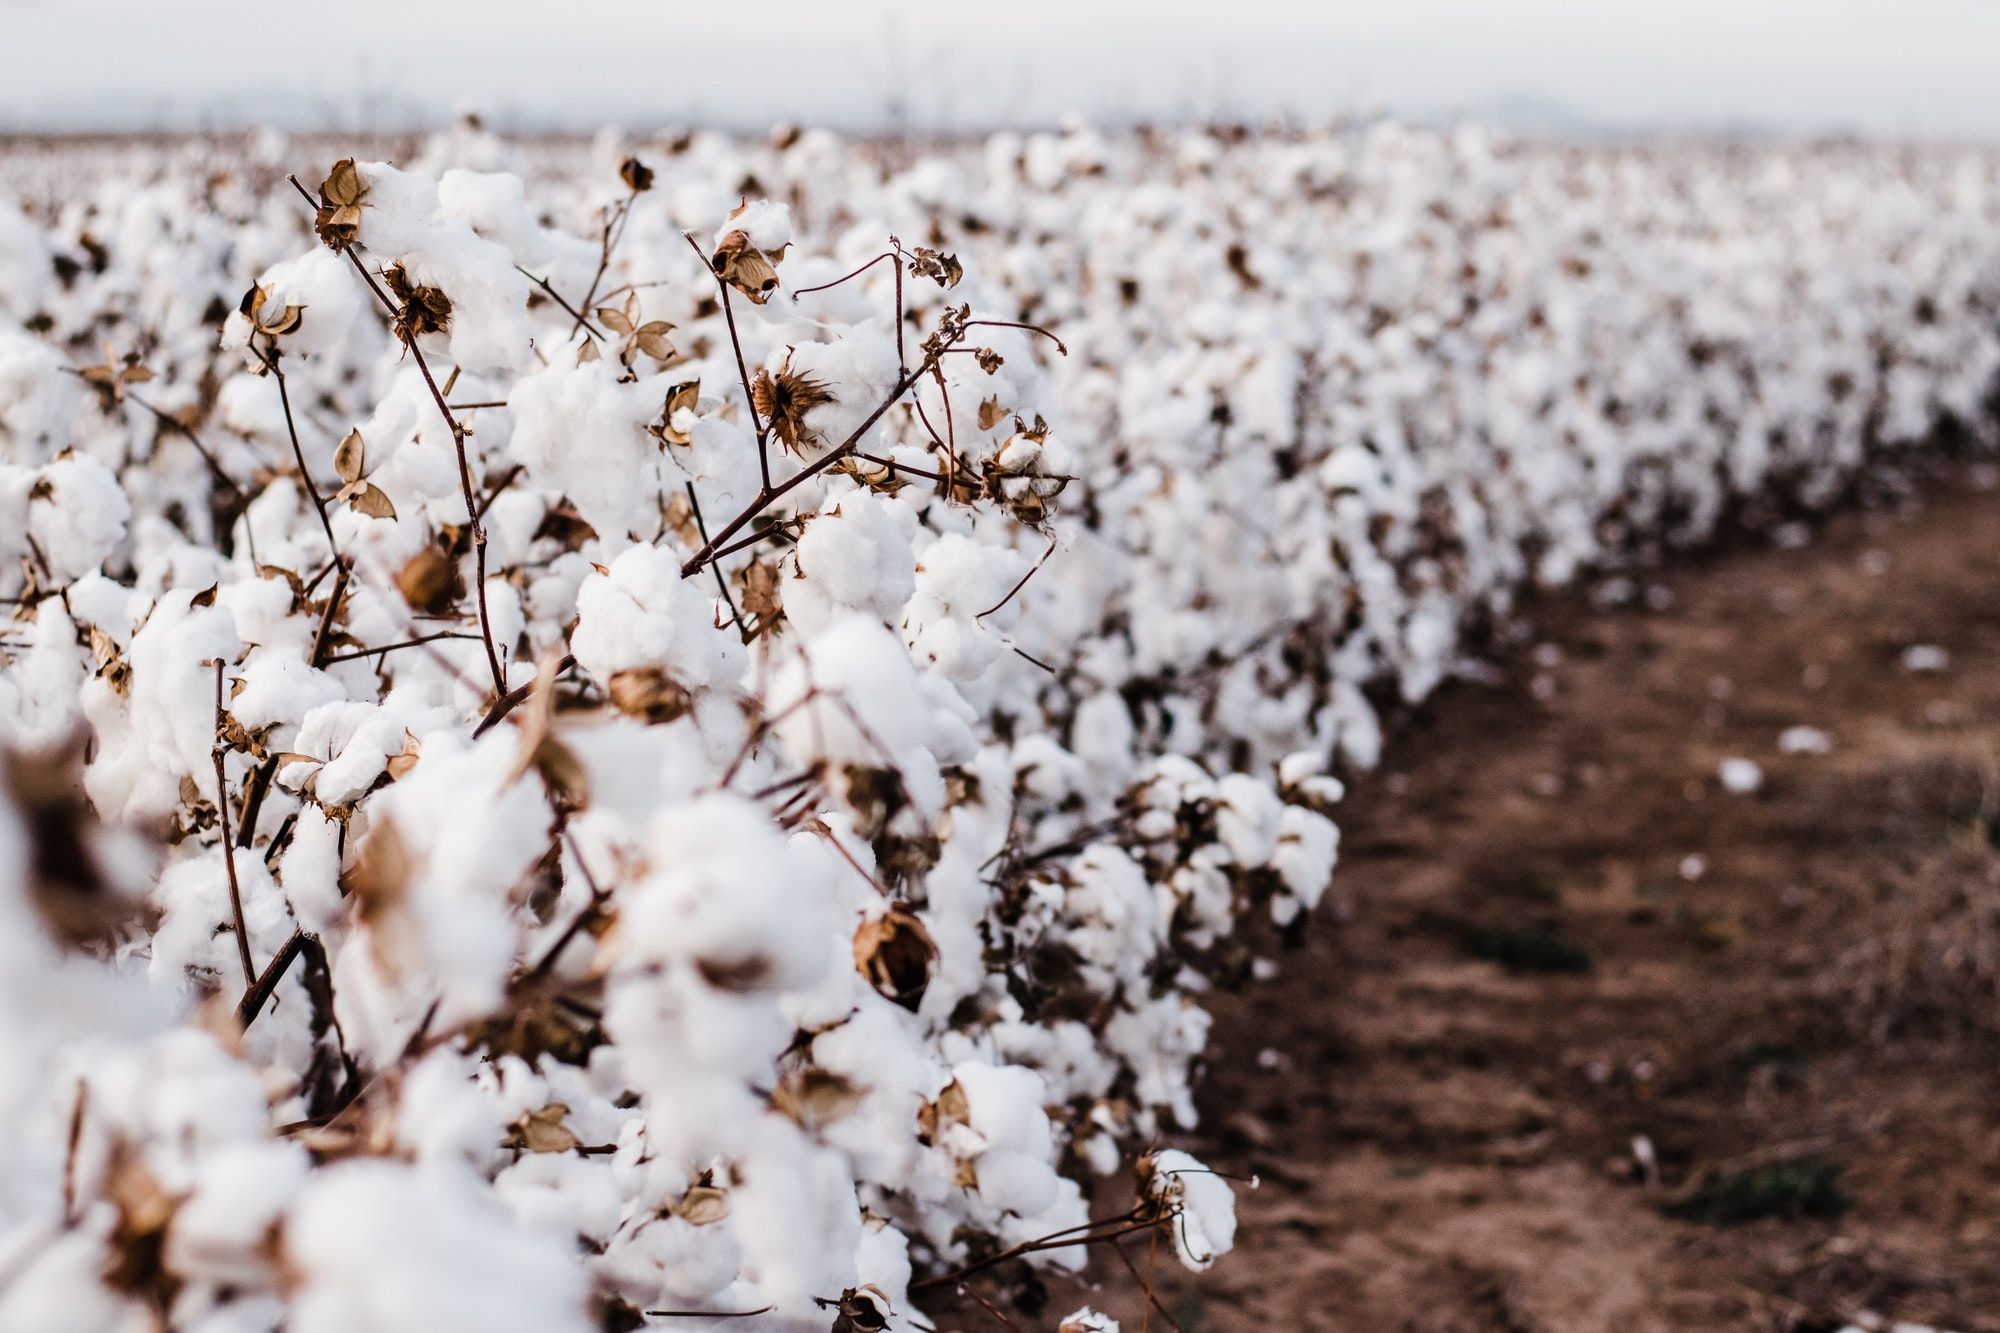 Cotton for days.